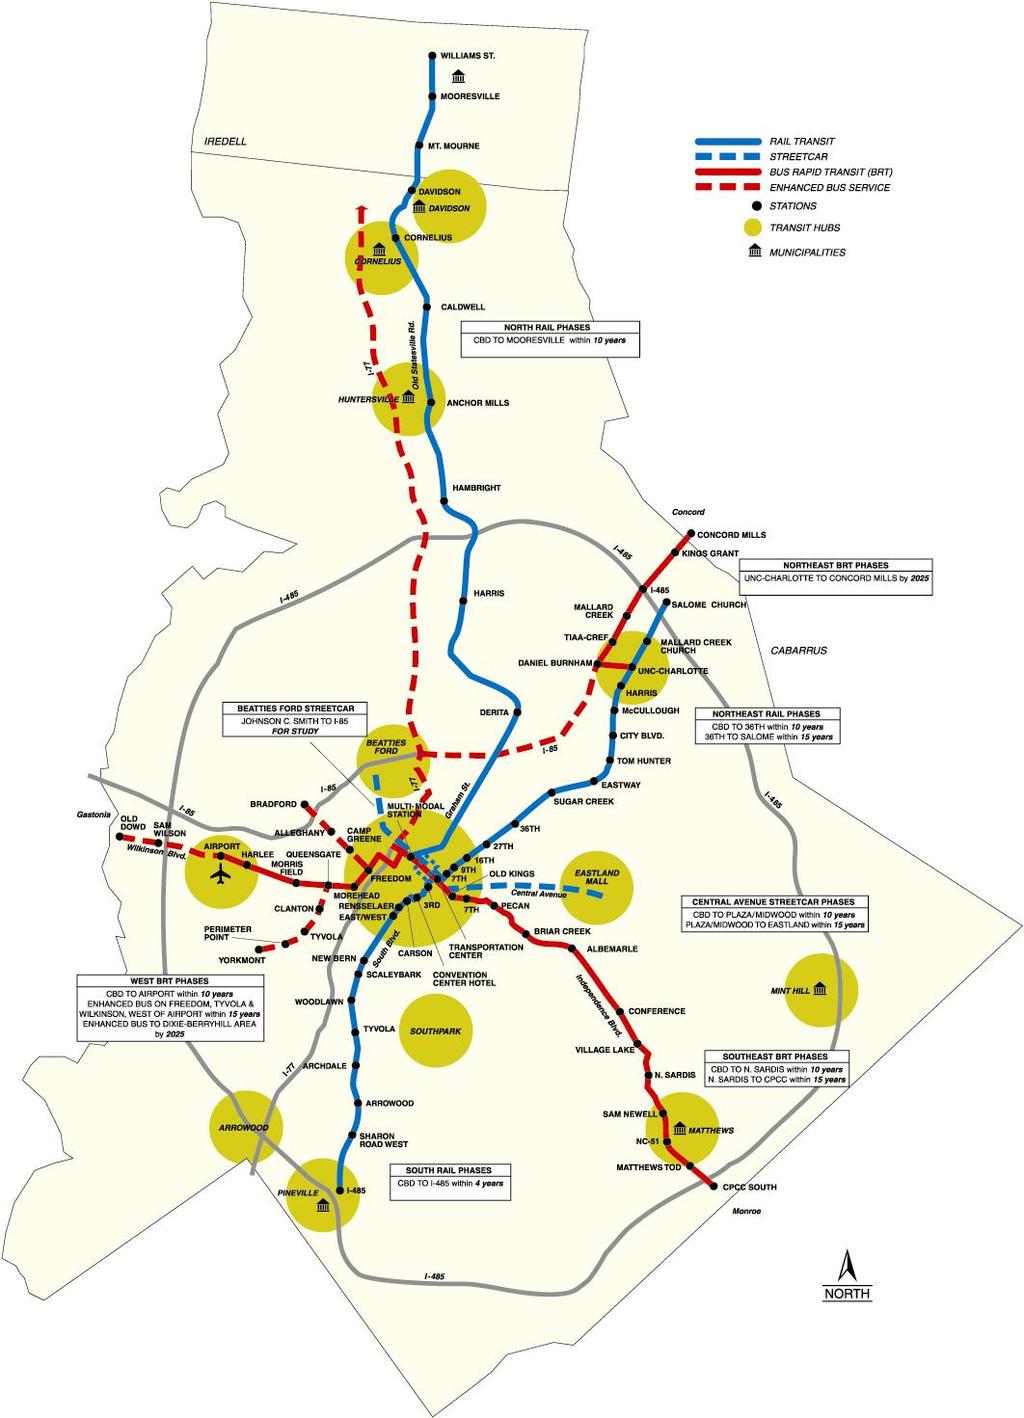 Recommended 2025 System Plan Serves 205,000 215,000 daily transit riders by 2025 28 miles of BRT guideway 21 miles of LRT 11